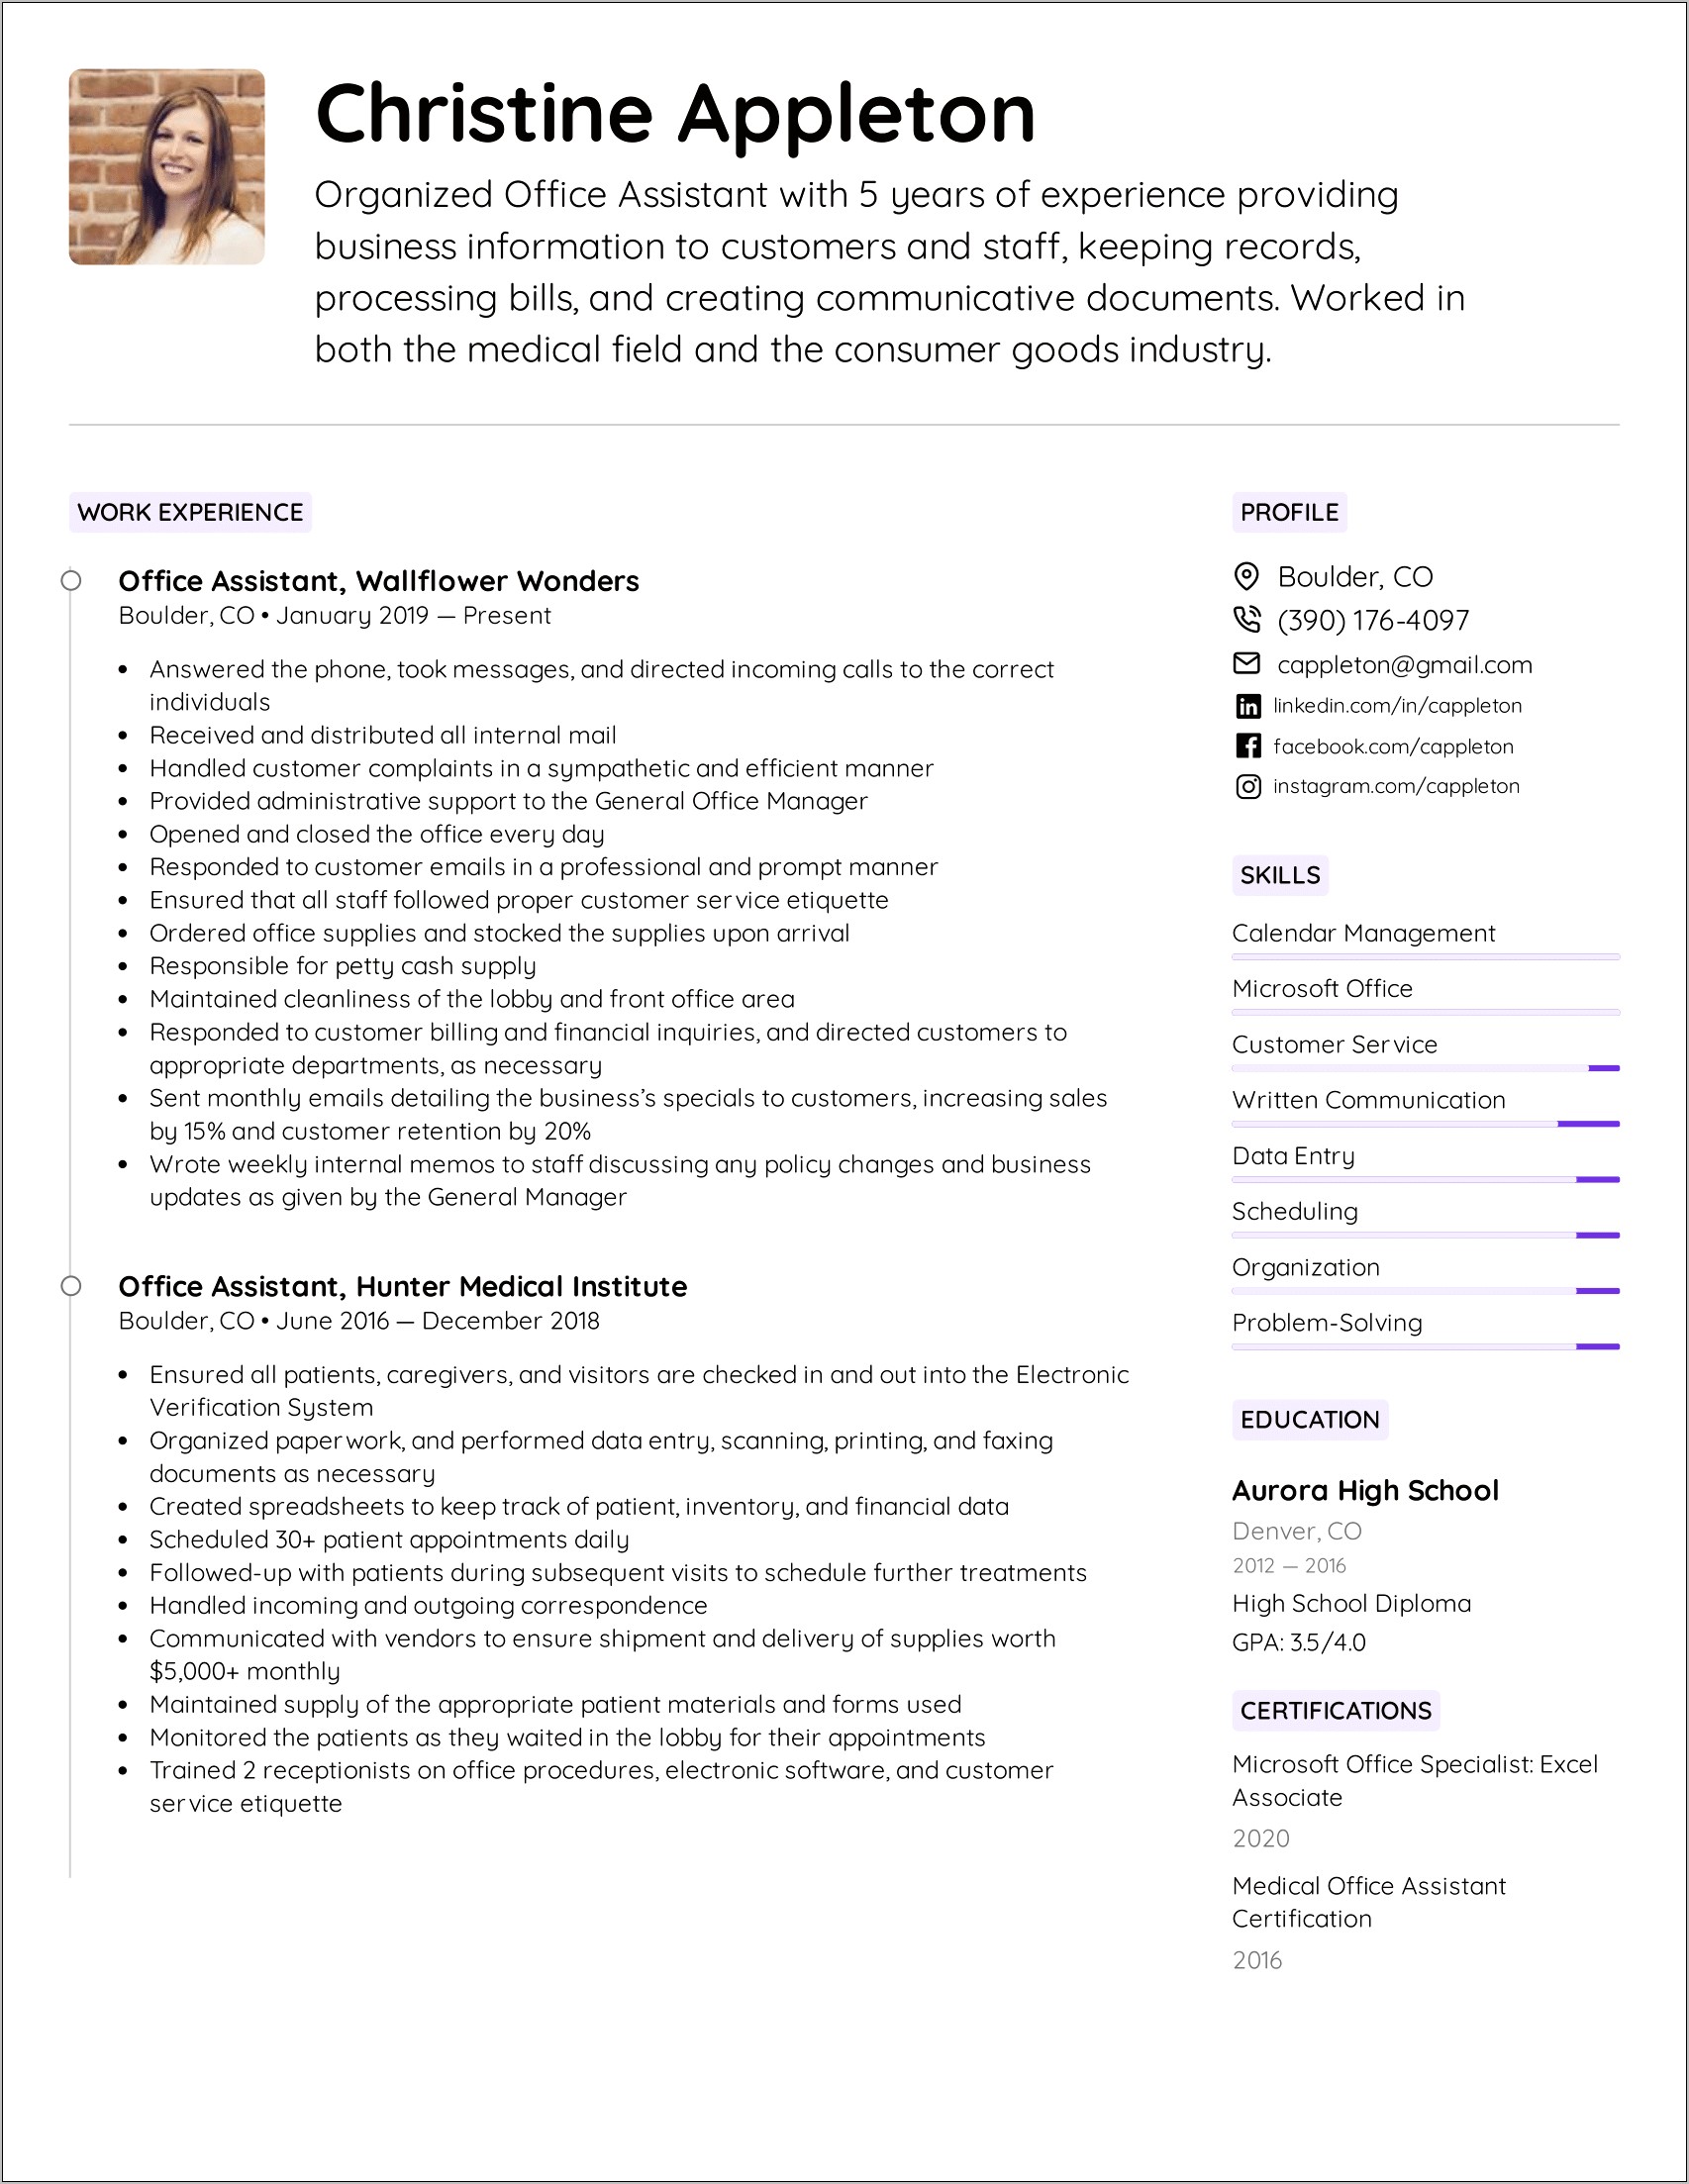 Data Entry Examples For Resume